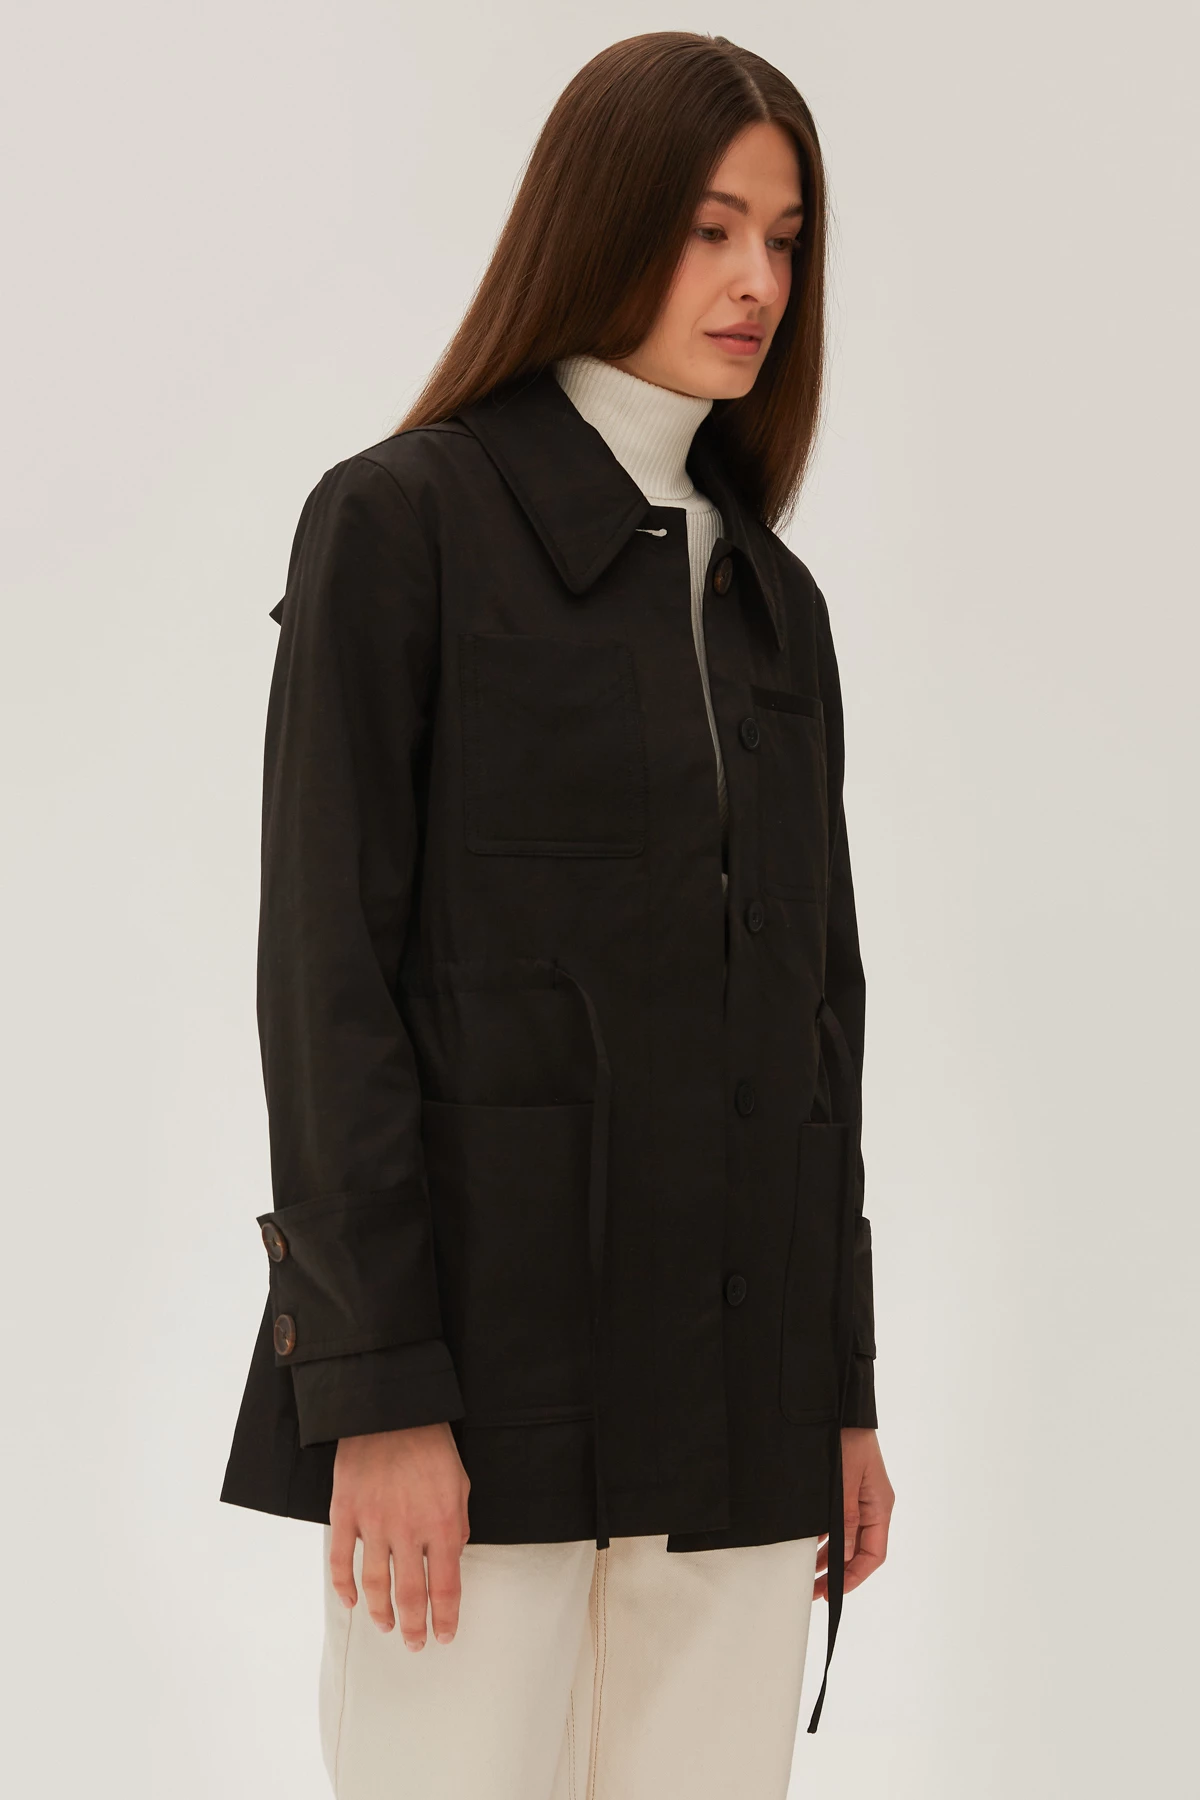 Short jacket with raincoat fabric in black color, photo 8